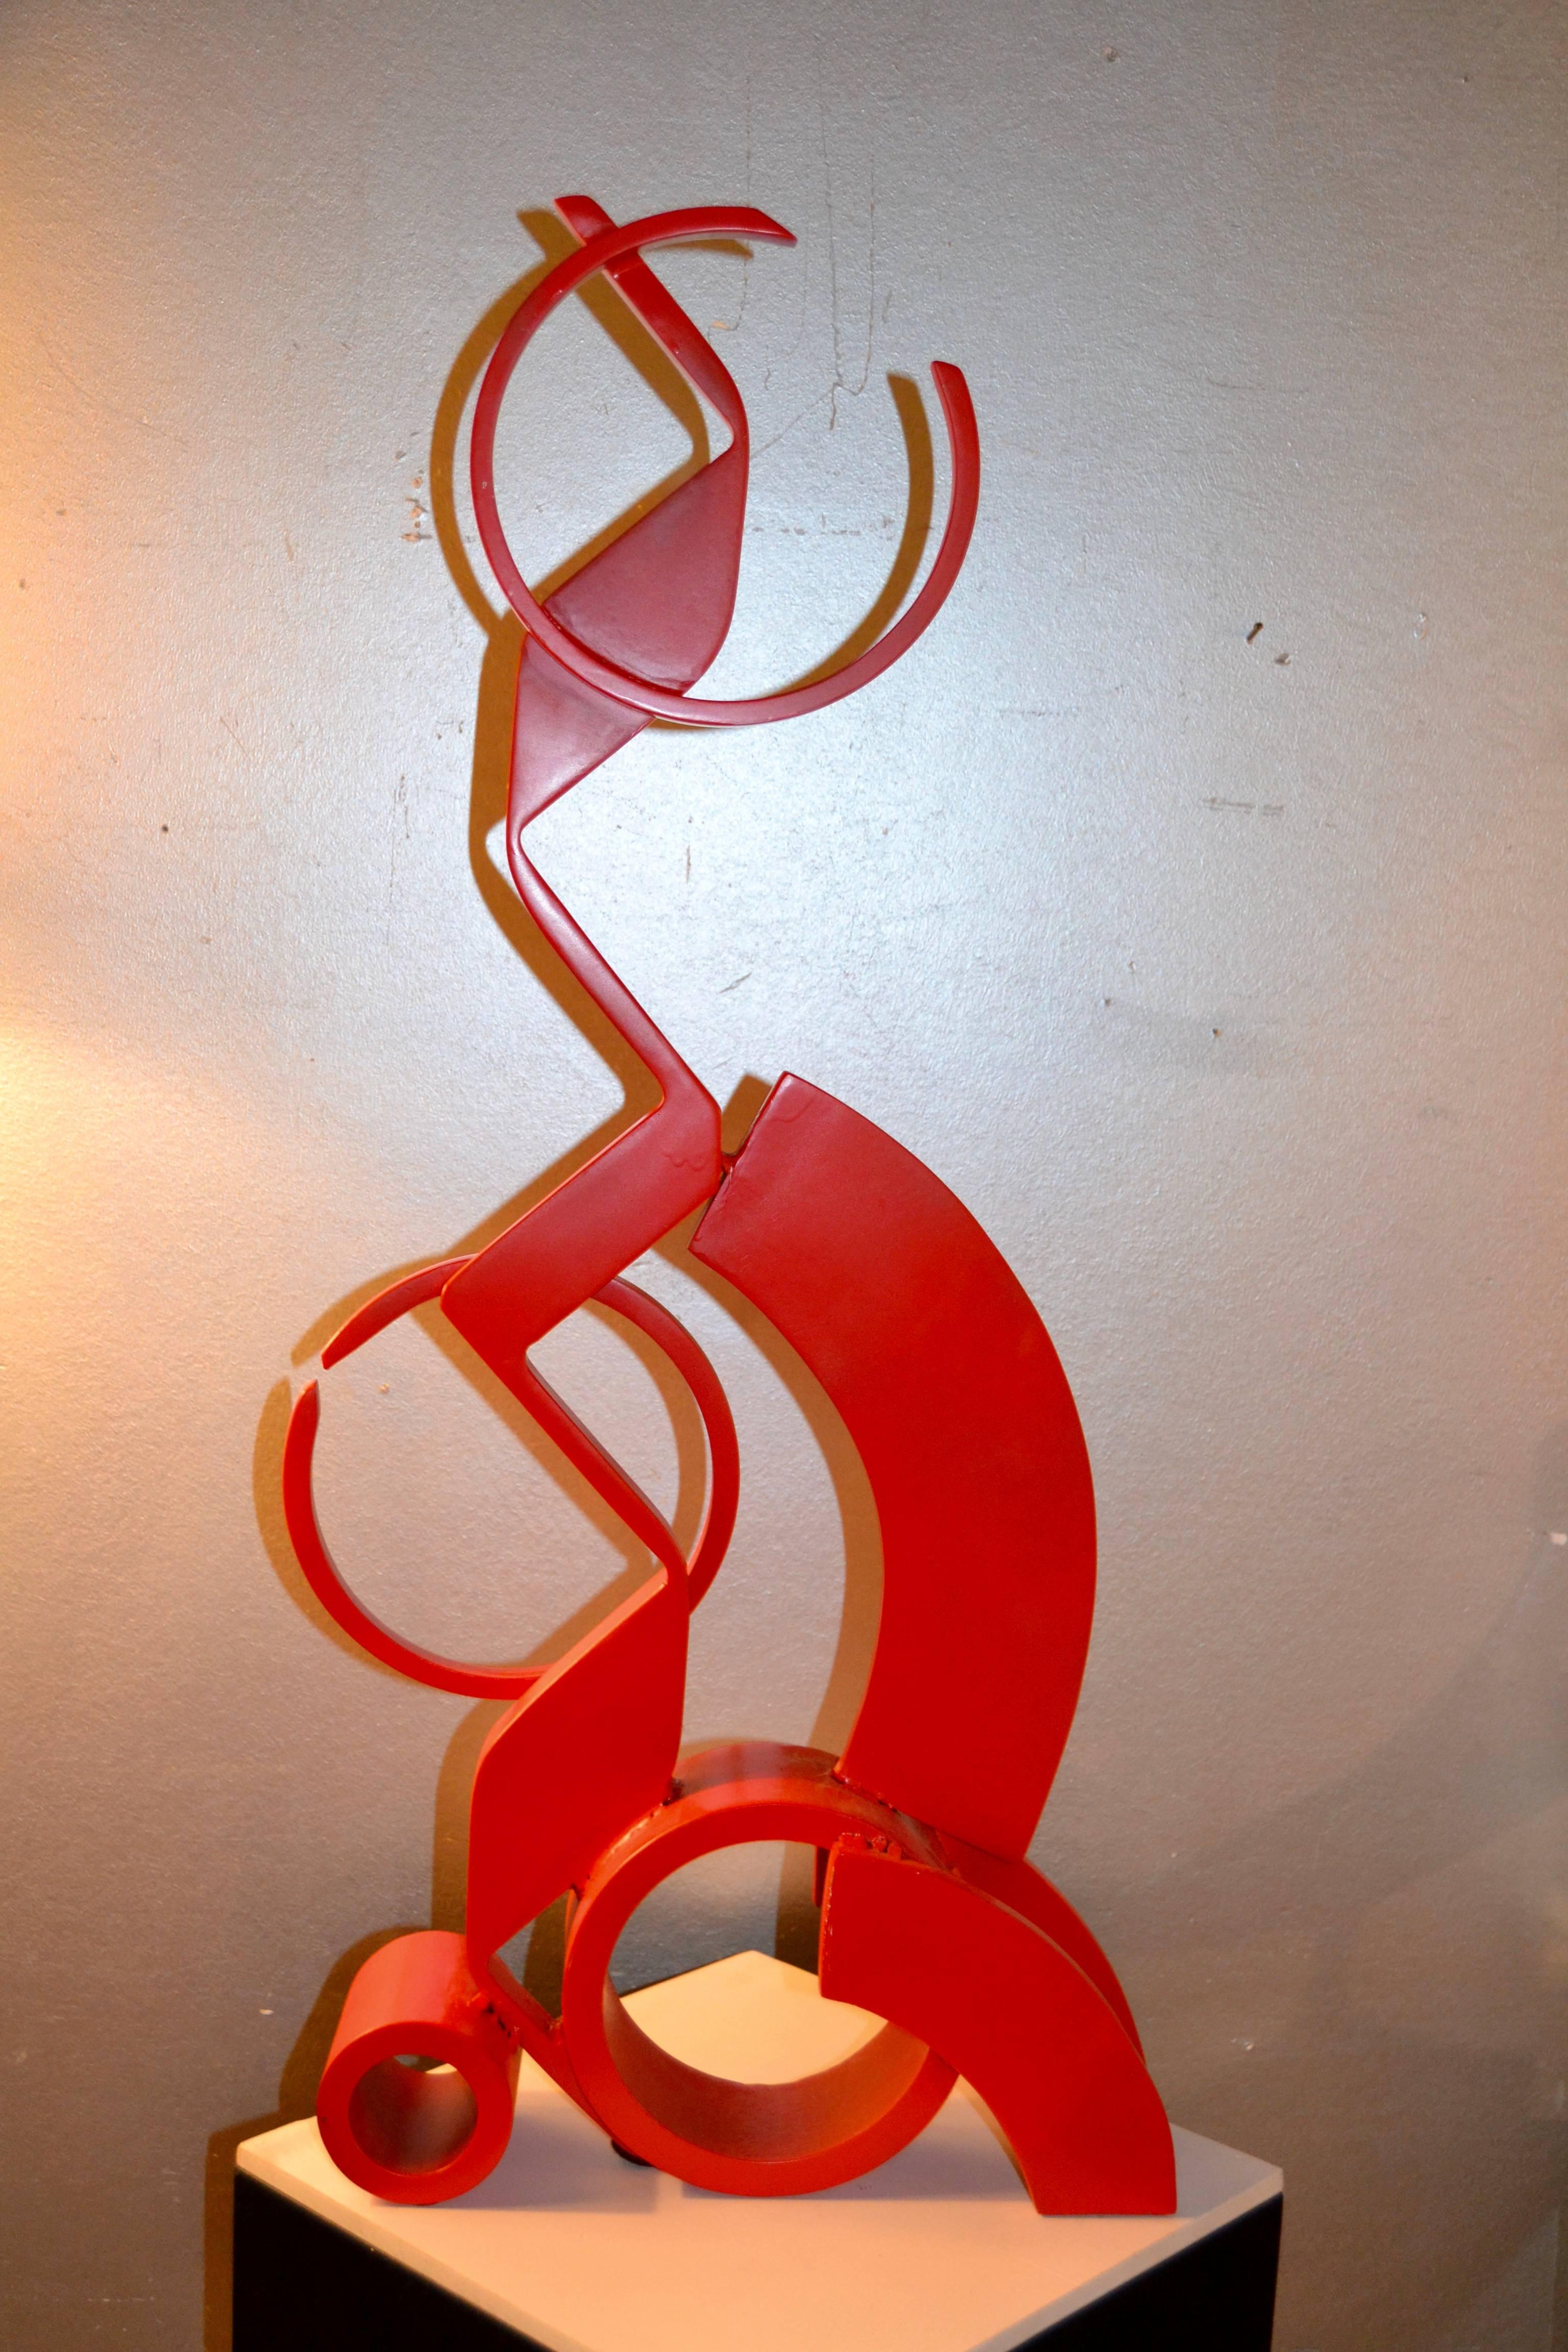 Kinetic Red Steel Sculpture by Caporicci